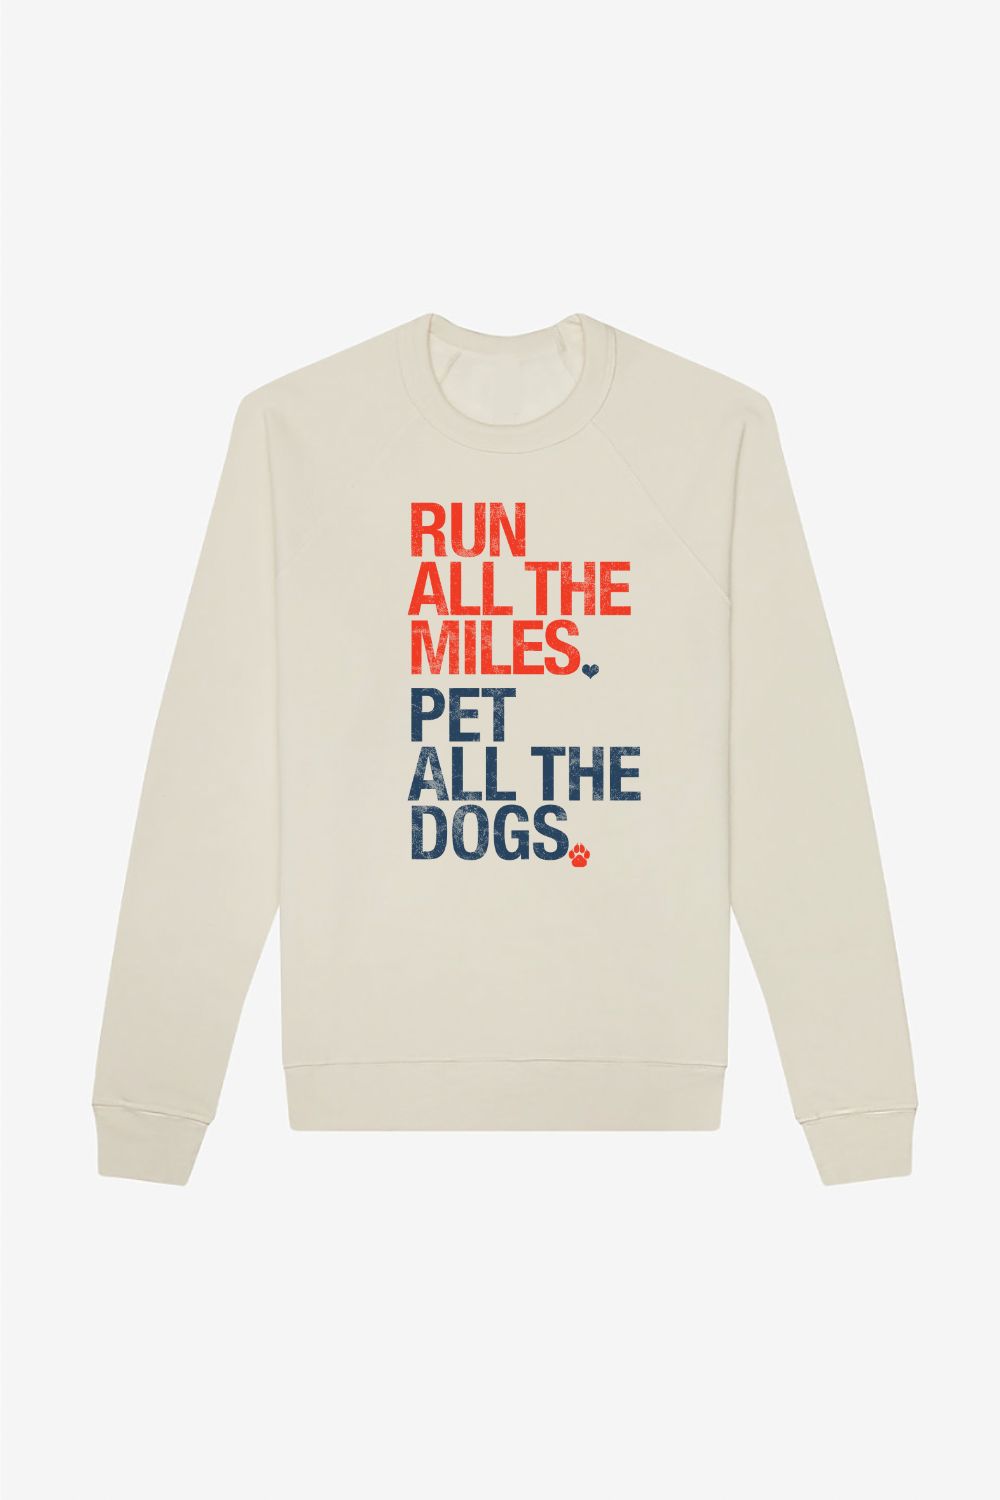 Run All The Miles, Pet All The Dogs Sweatshirt